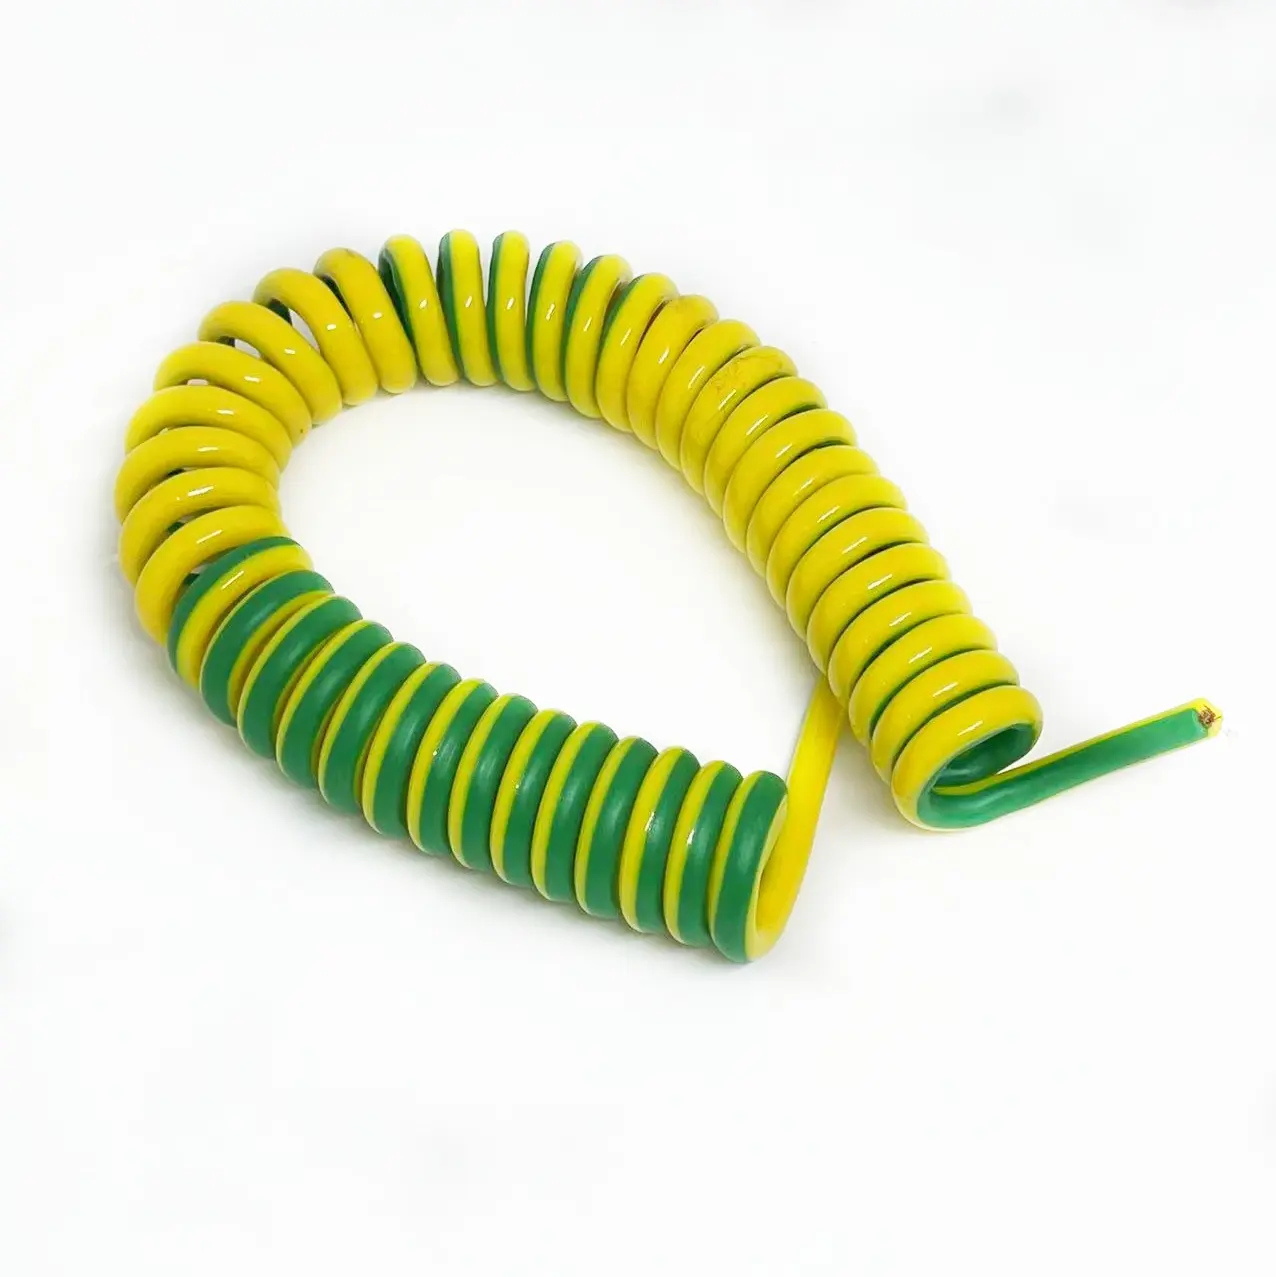 Earth Yellow Green Copper Power Cord Insulated with PVC/PU for Ground Earth Spring Durable Wire Spiral Cable Wire